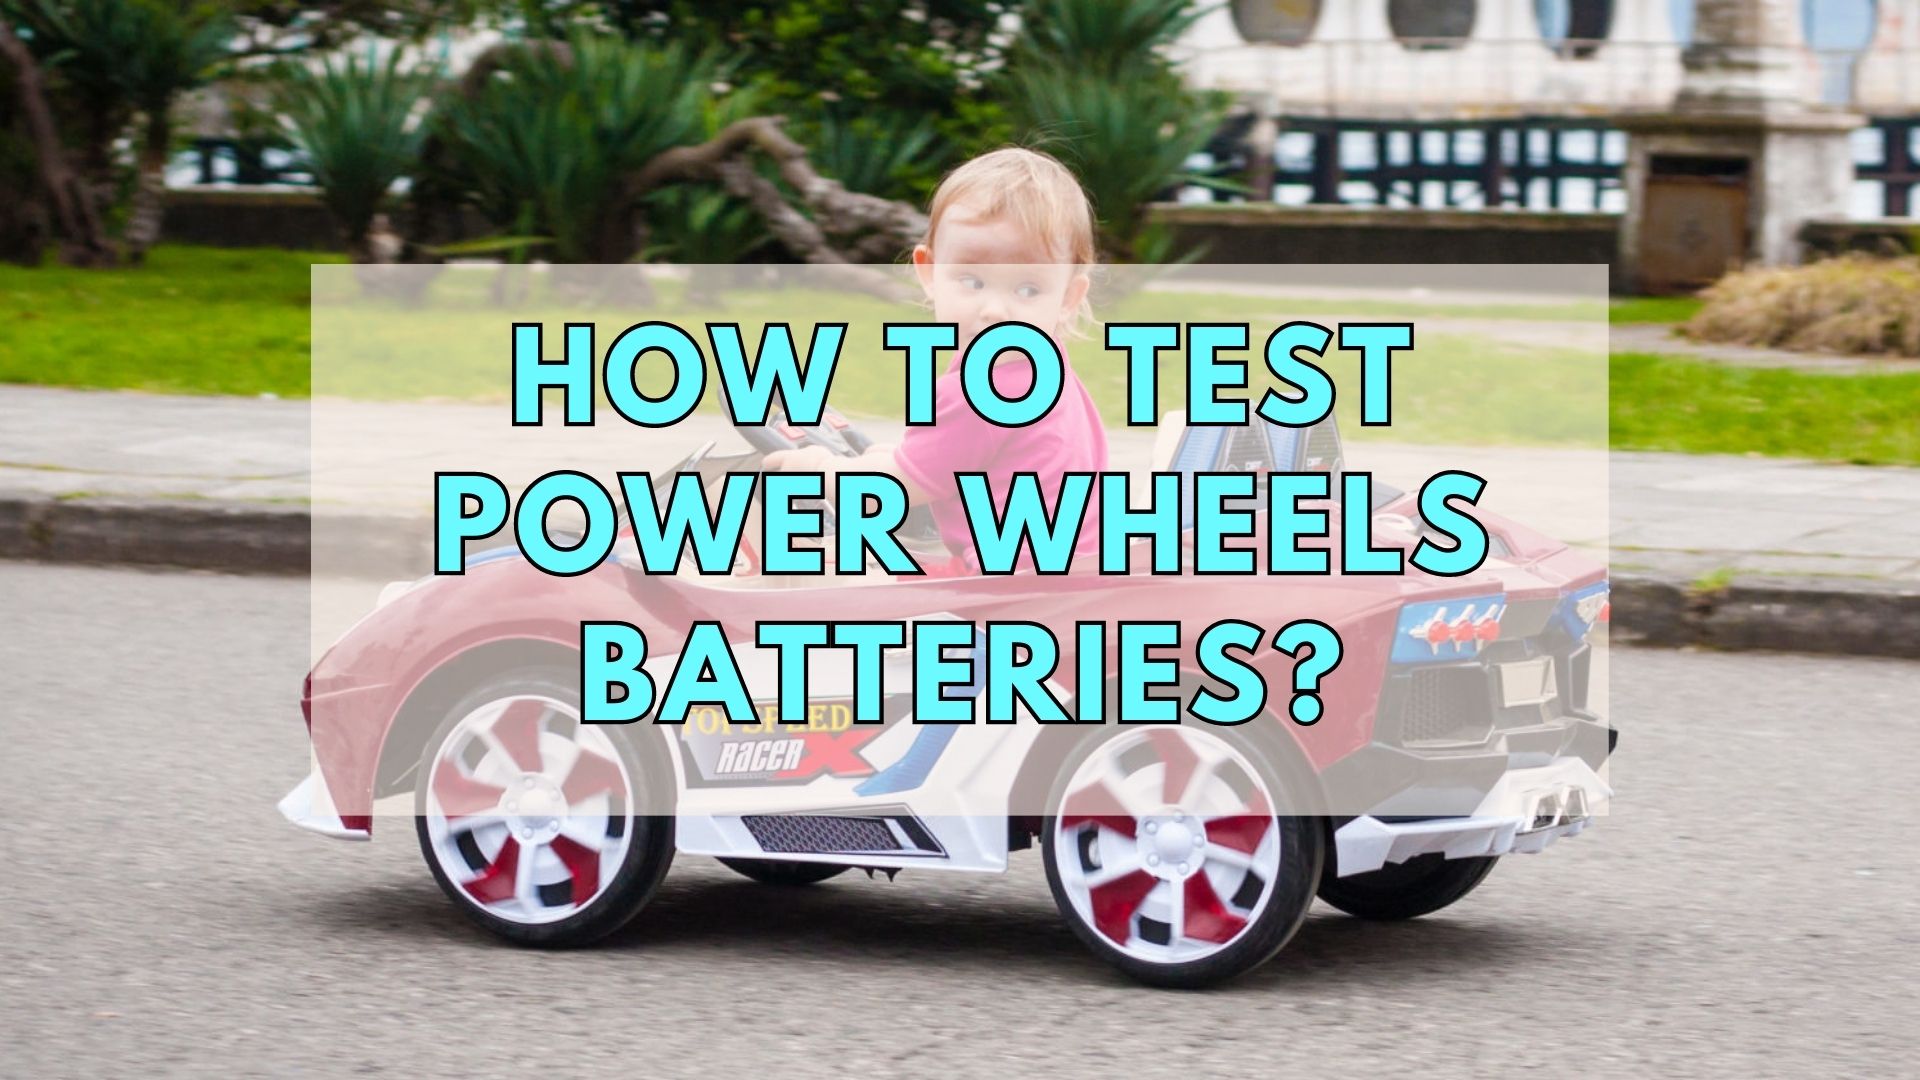 How To Test Power Wheels Batteries